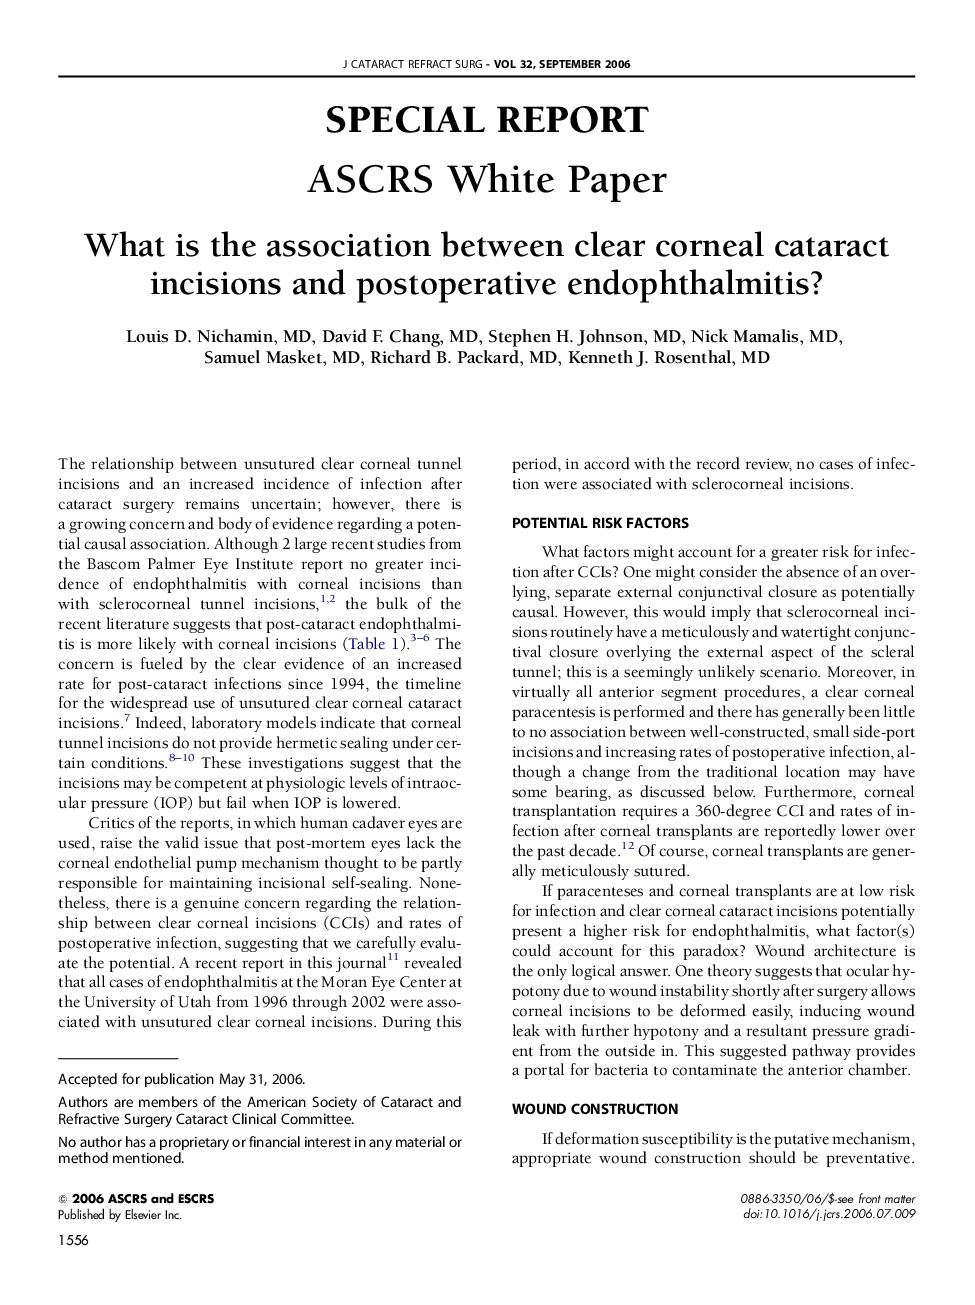 ASCRS White Paper